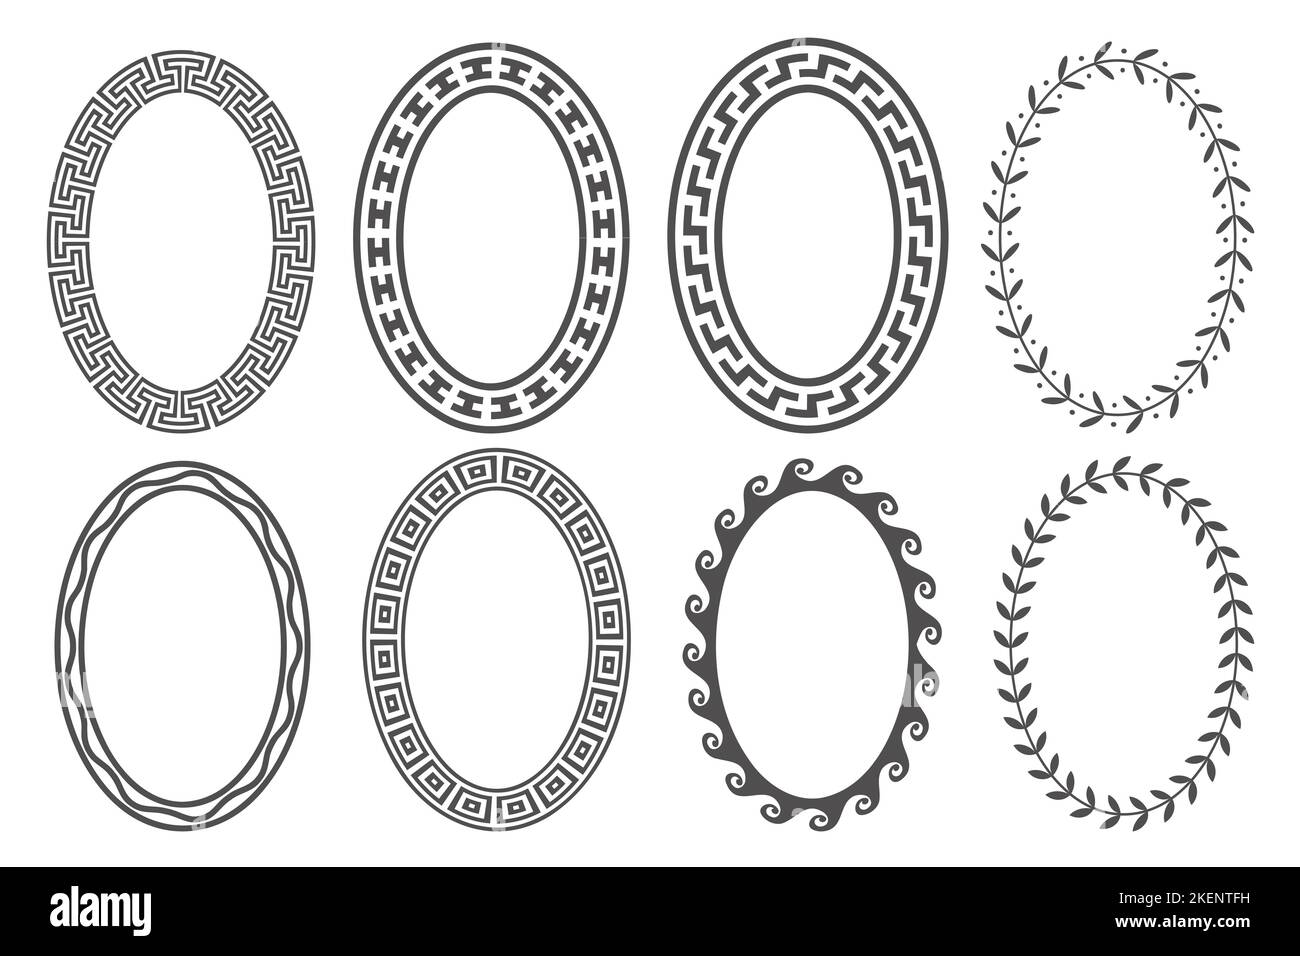 Greek key oval frame set. Circle borders with meander ornaments. Ellipse ancient designs. Vector Stock Vector